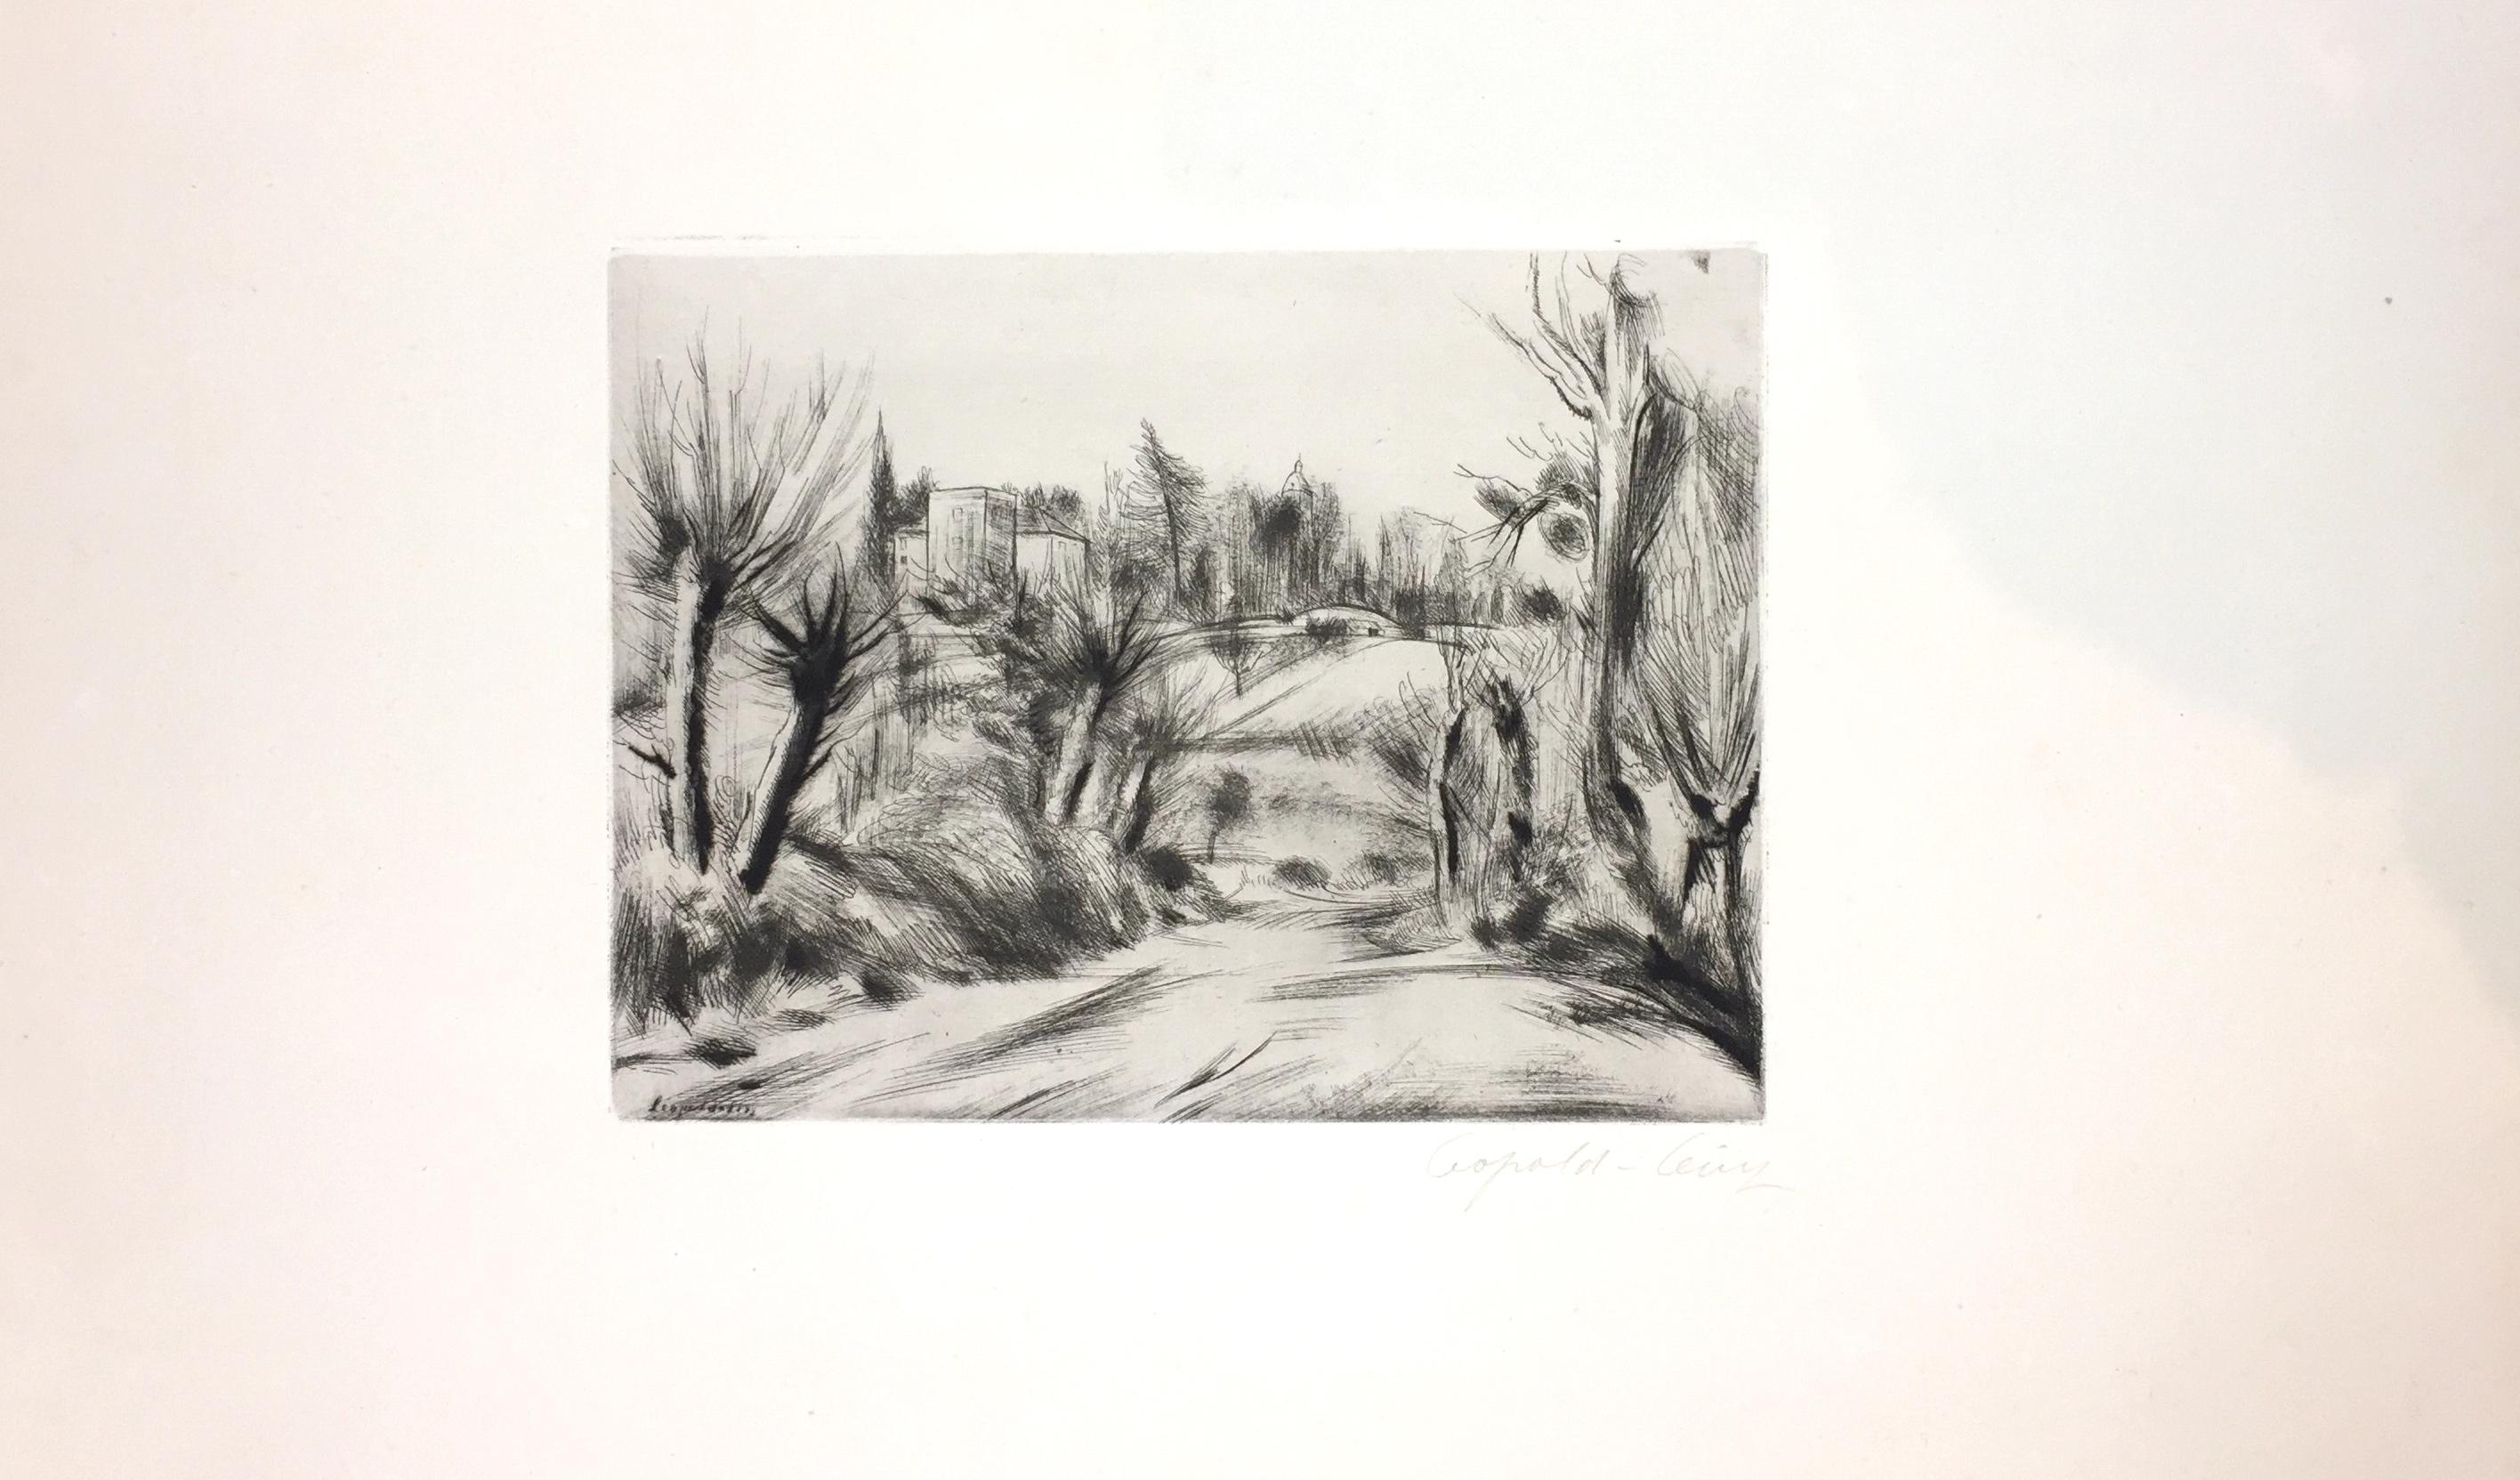 Landscape is an original artwork realized by the French artist Léopold Lévy (1882-1966) in the first half of the XX century. Etching and drypoint on paper.

Image dimensions: 15x20 cm.

Hand-signed by the artist on the lower right corner.

Perfect